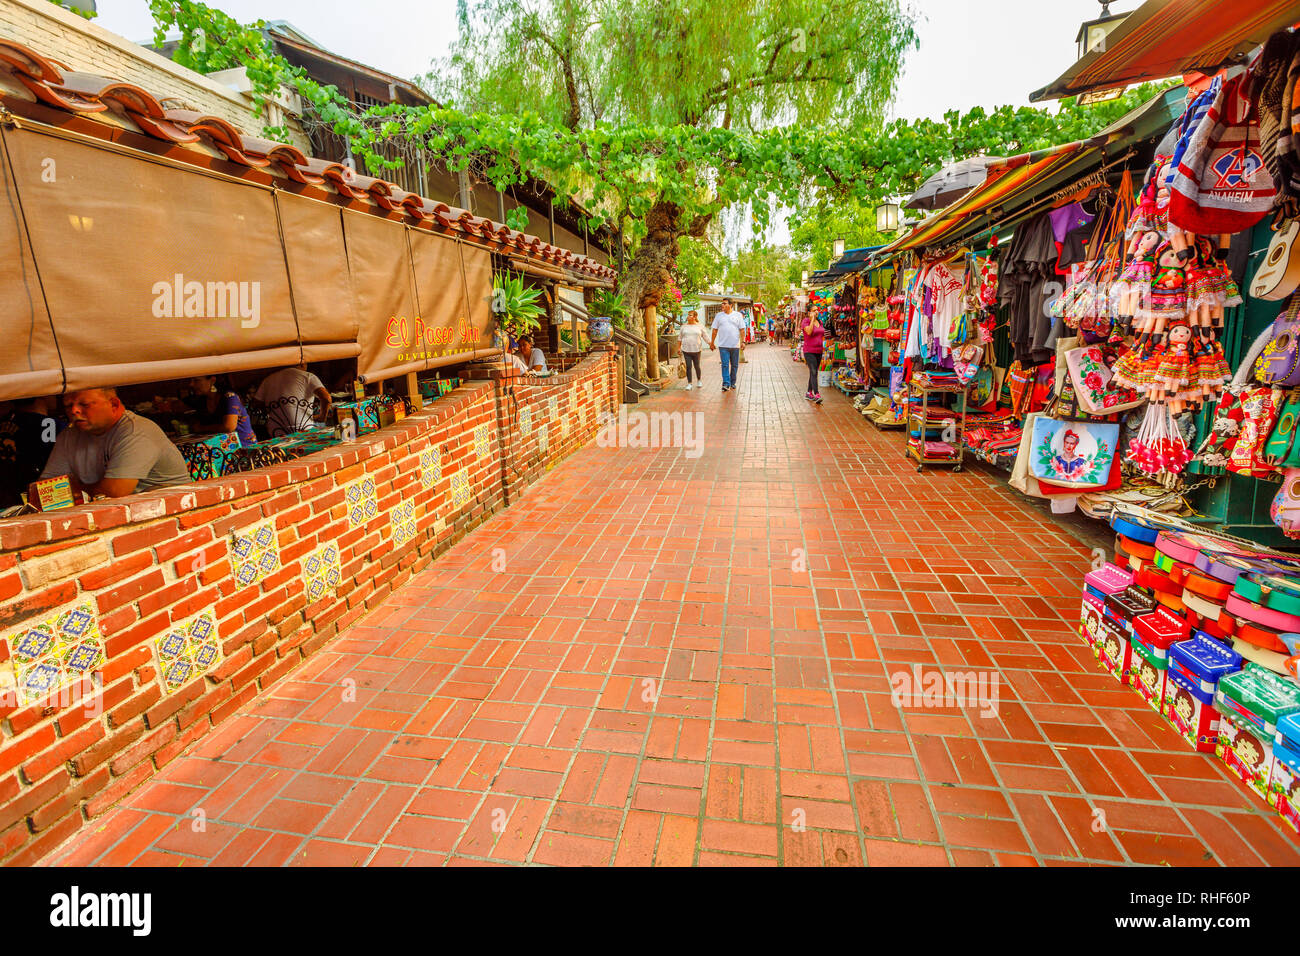 Los Angeles, California, United States - August 9, 2018: El Paseo, Mexican restaurant and traditional market along Olvera Street, a pedestrian street Stock Photo